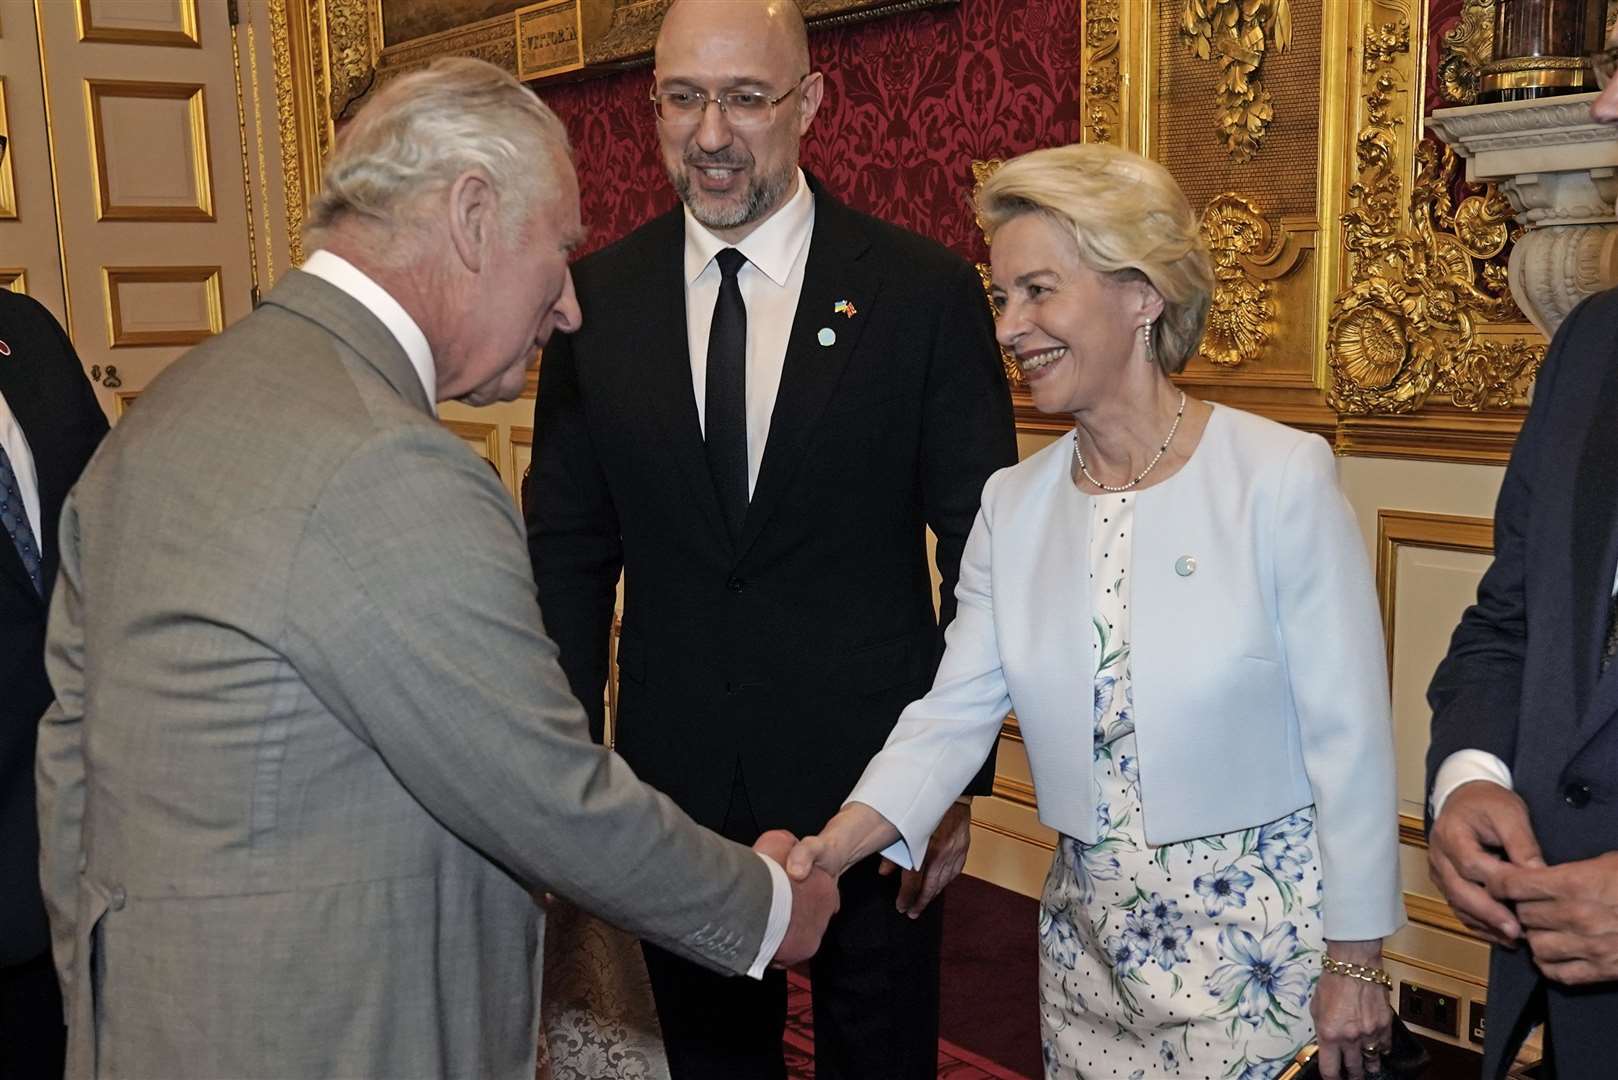 Charles greets Ursula von der Leyen at the palace reception (Aaron Chown/PA)